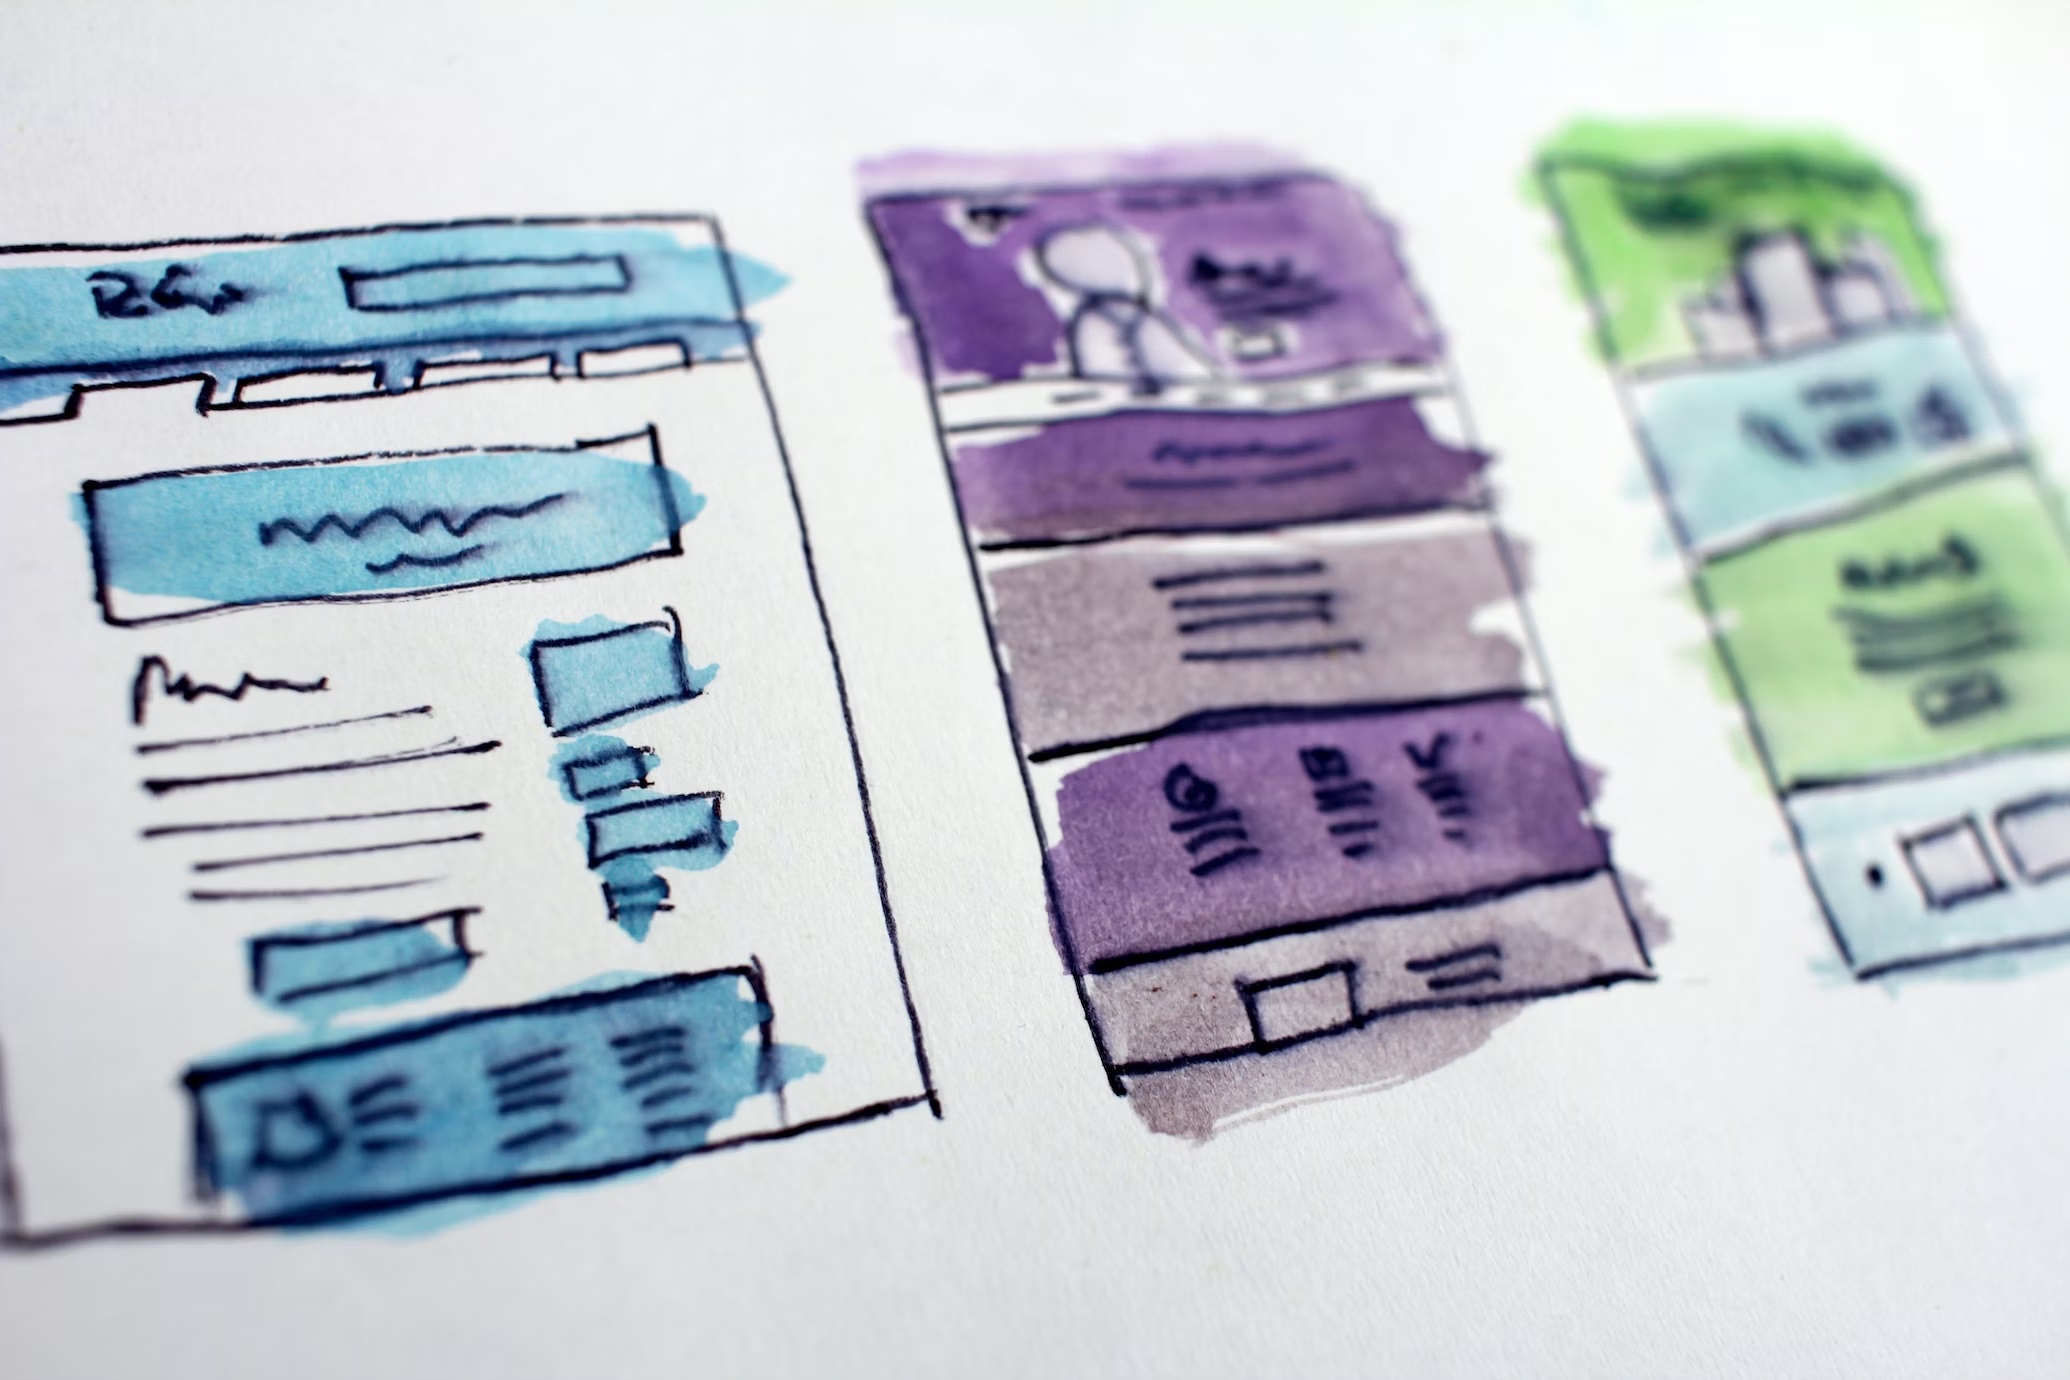 Blueprints of website designs on a white paper.